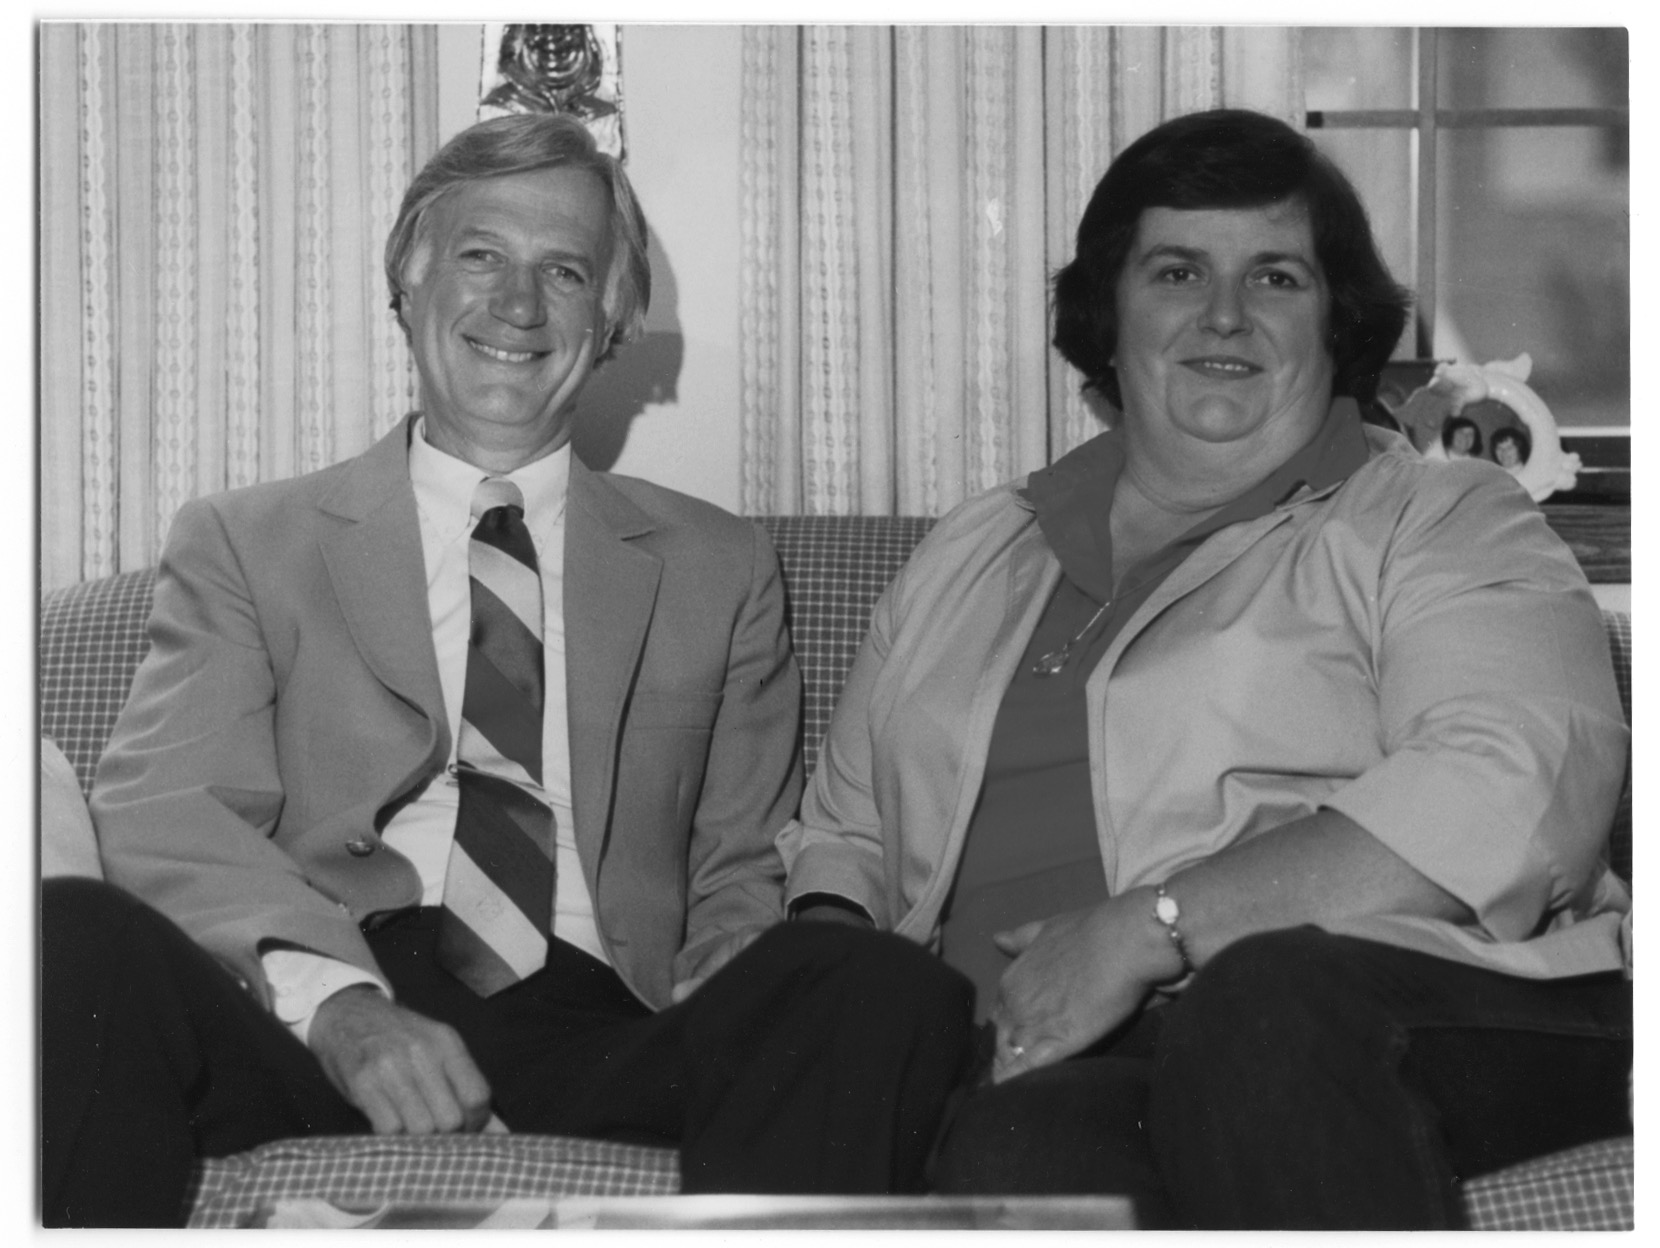 Roger and Annette Brandstetter. Photo taken by the La Crosse Tribune photographer Steve Noffke. The photograph was published on June 2, 1985 as part of the La Crosse Tribune's "The Cuban Odyssey." (Photo courtesy of Murphy Library Special Collections/ARC, University of Wisconsin-La Crosse)